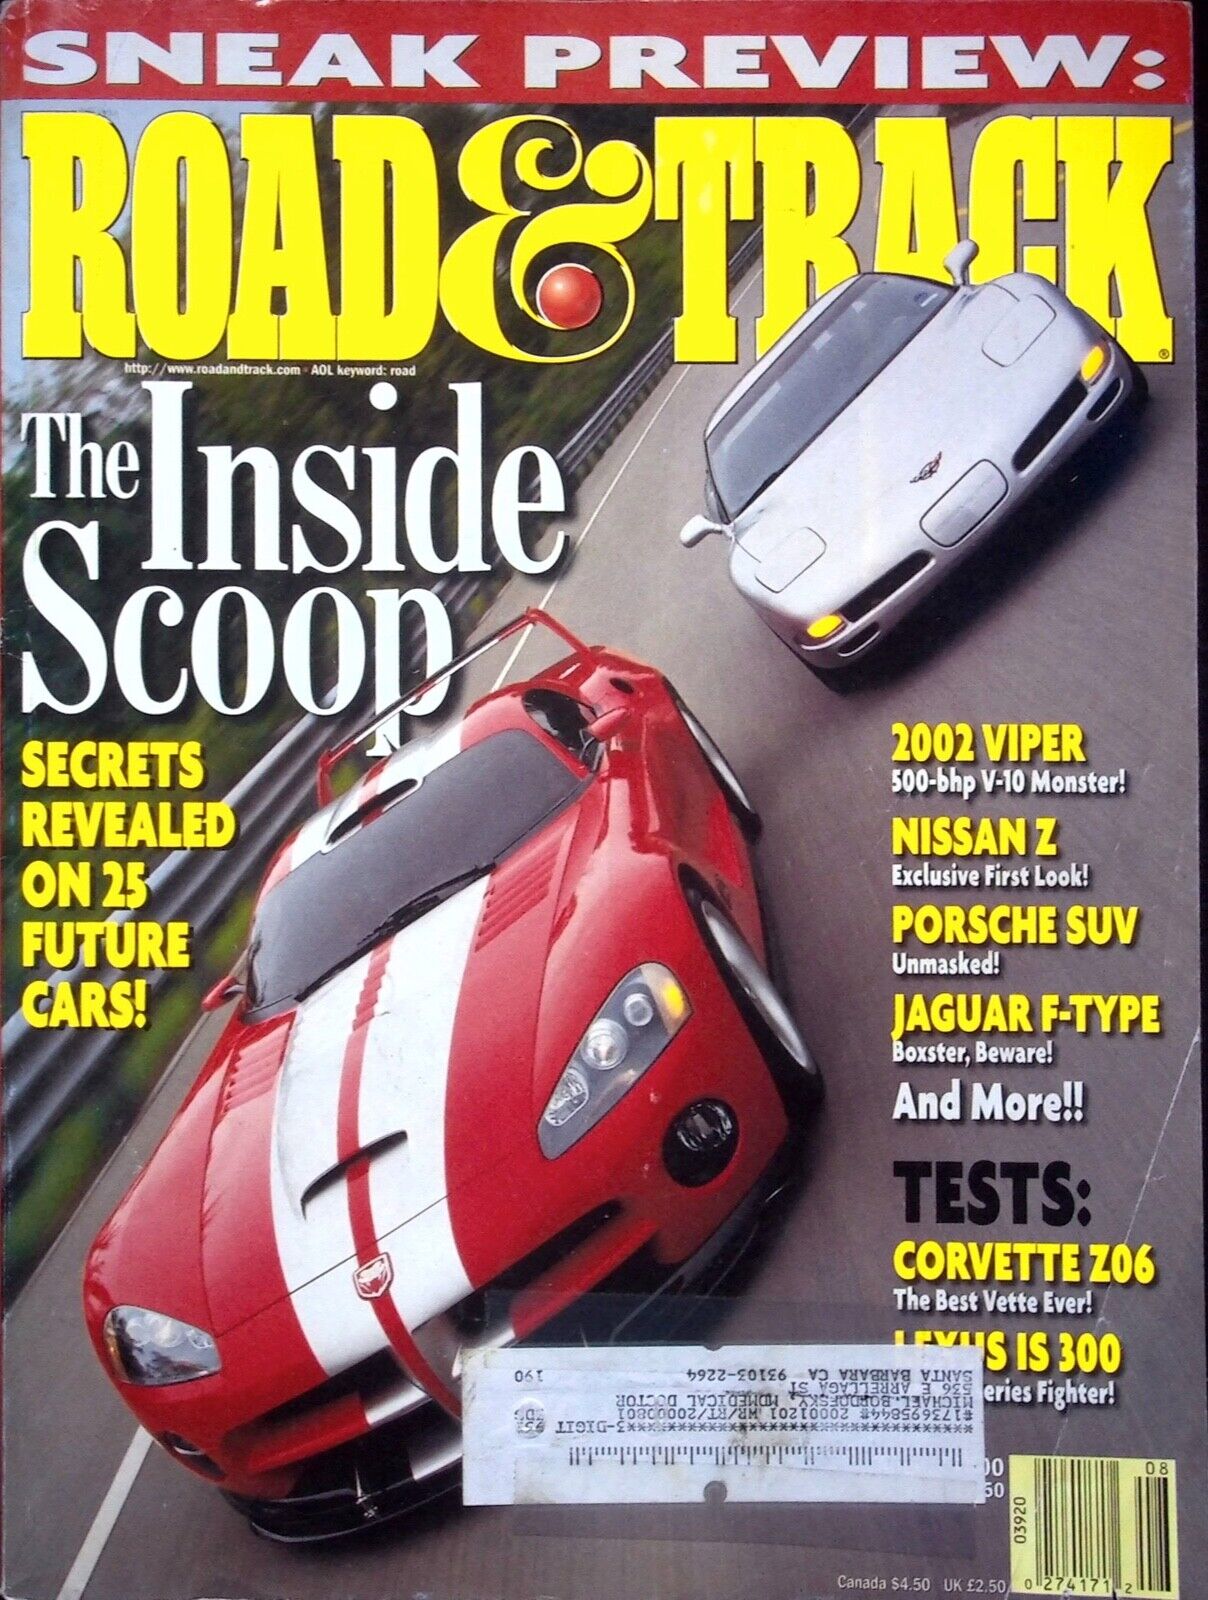 2002 VIPER - ROAD & TRACK MAGAZINE, AUGUST 2000 VOL 51, NUMBER 12